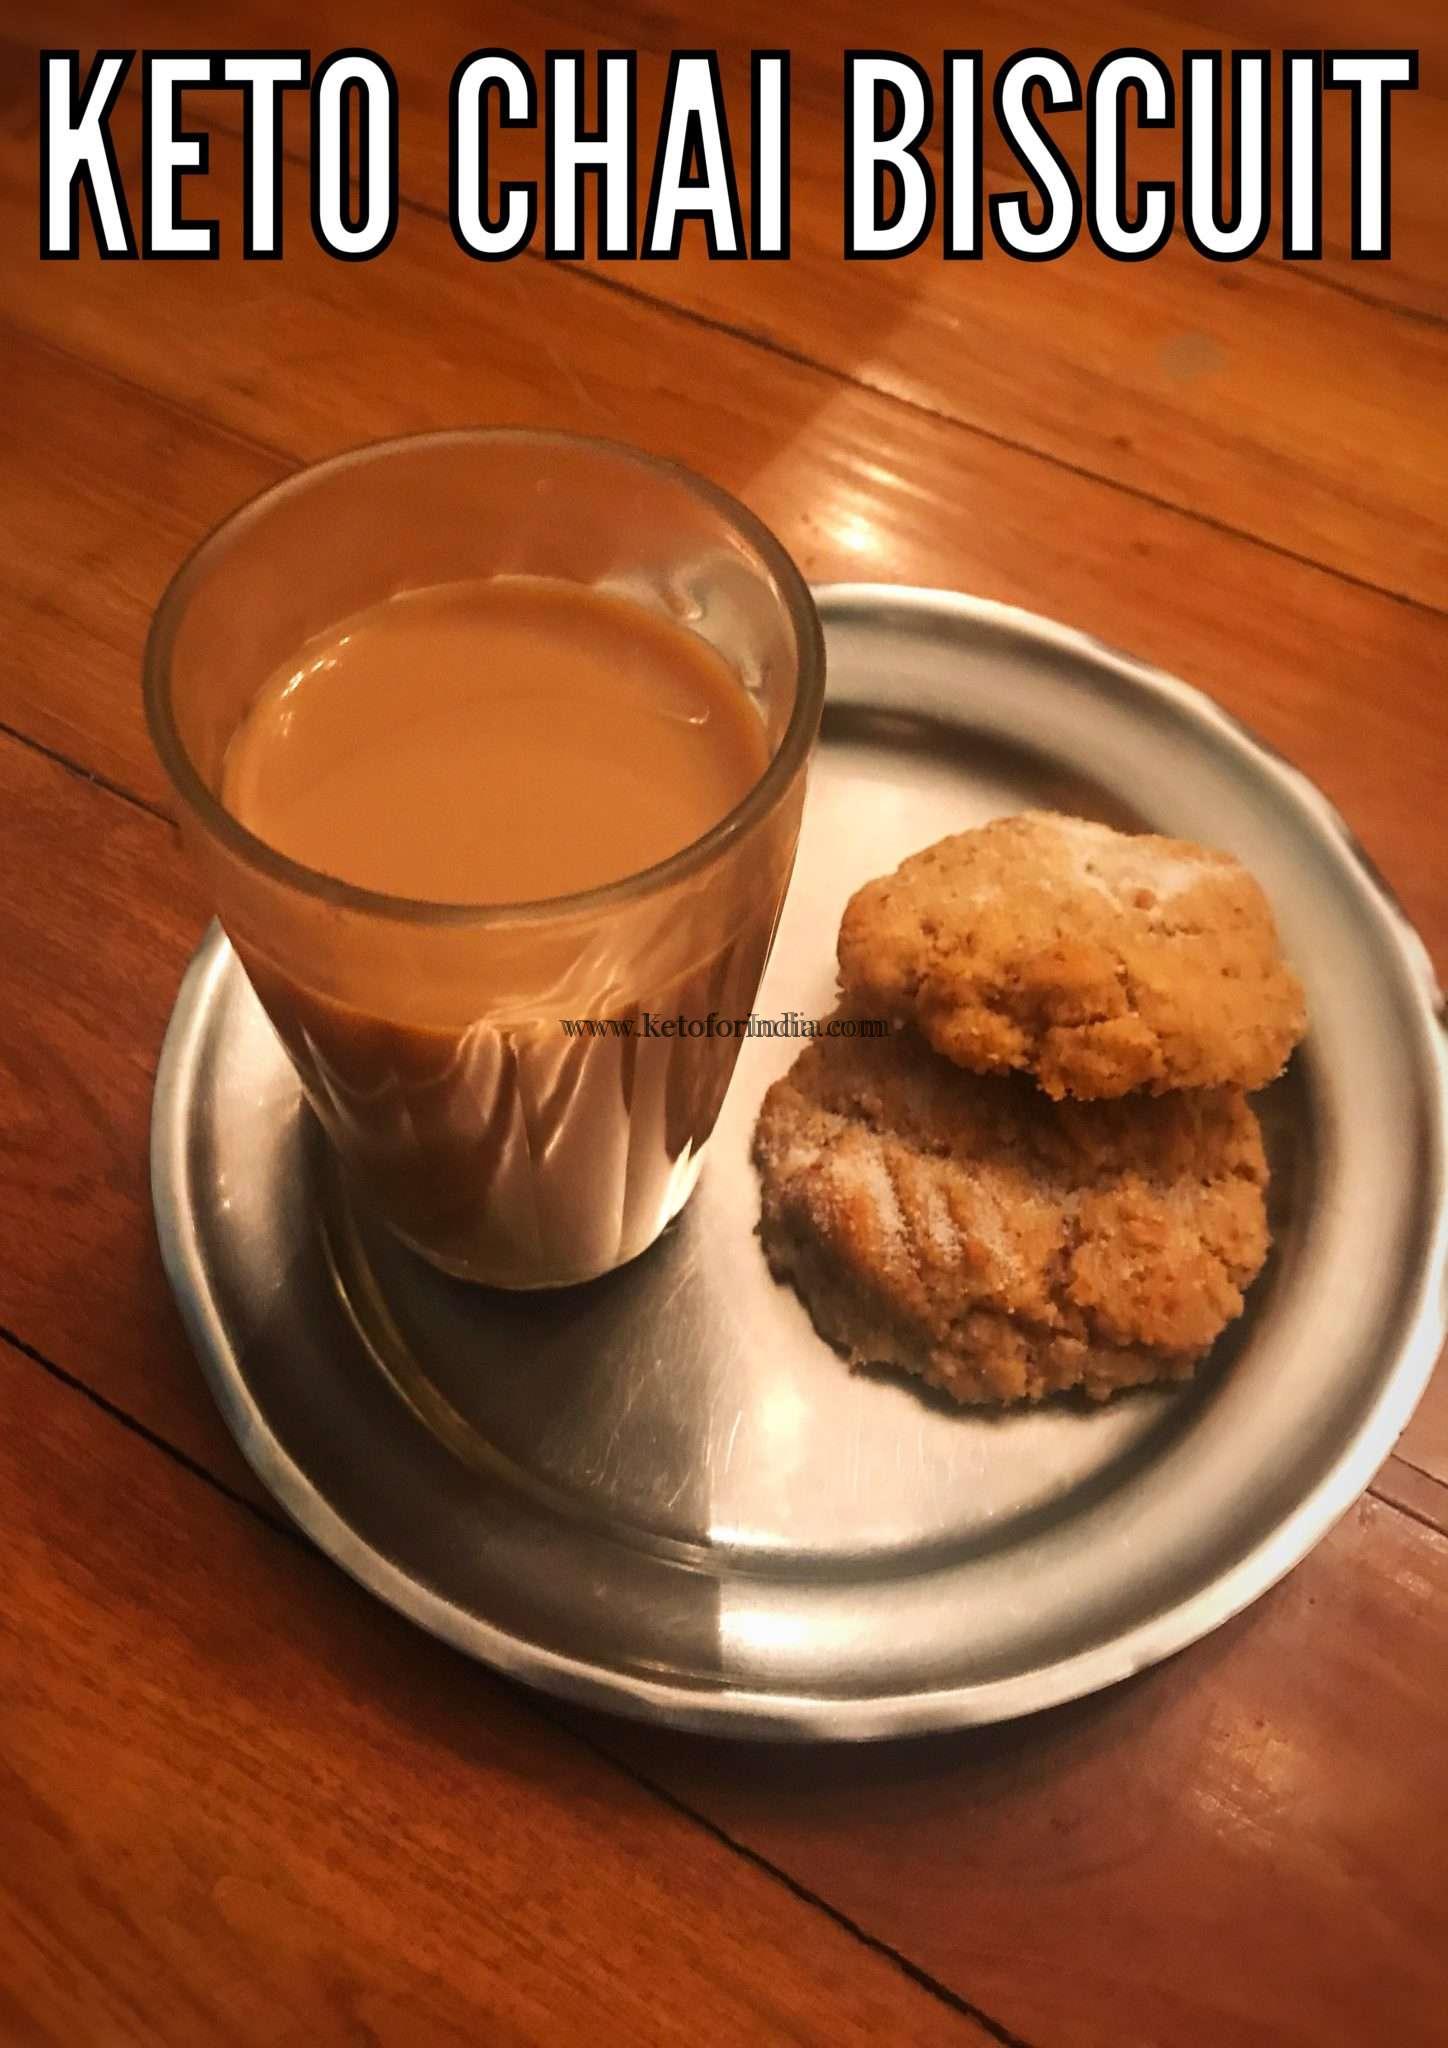 Keto Chai and Biscuits | Keto For India